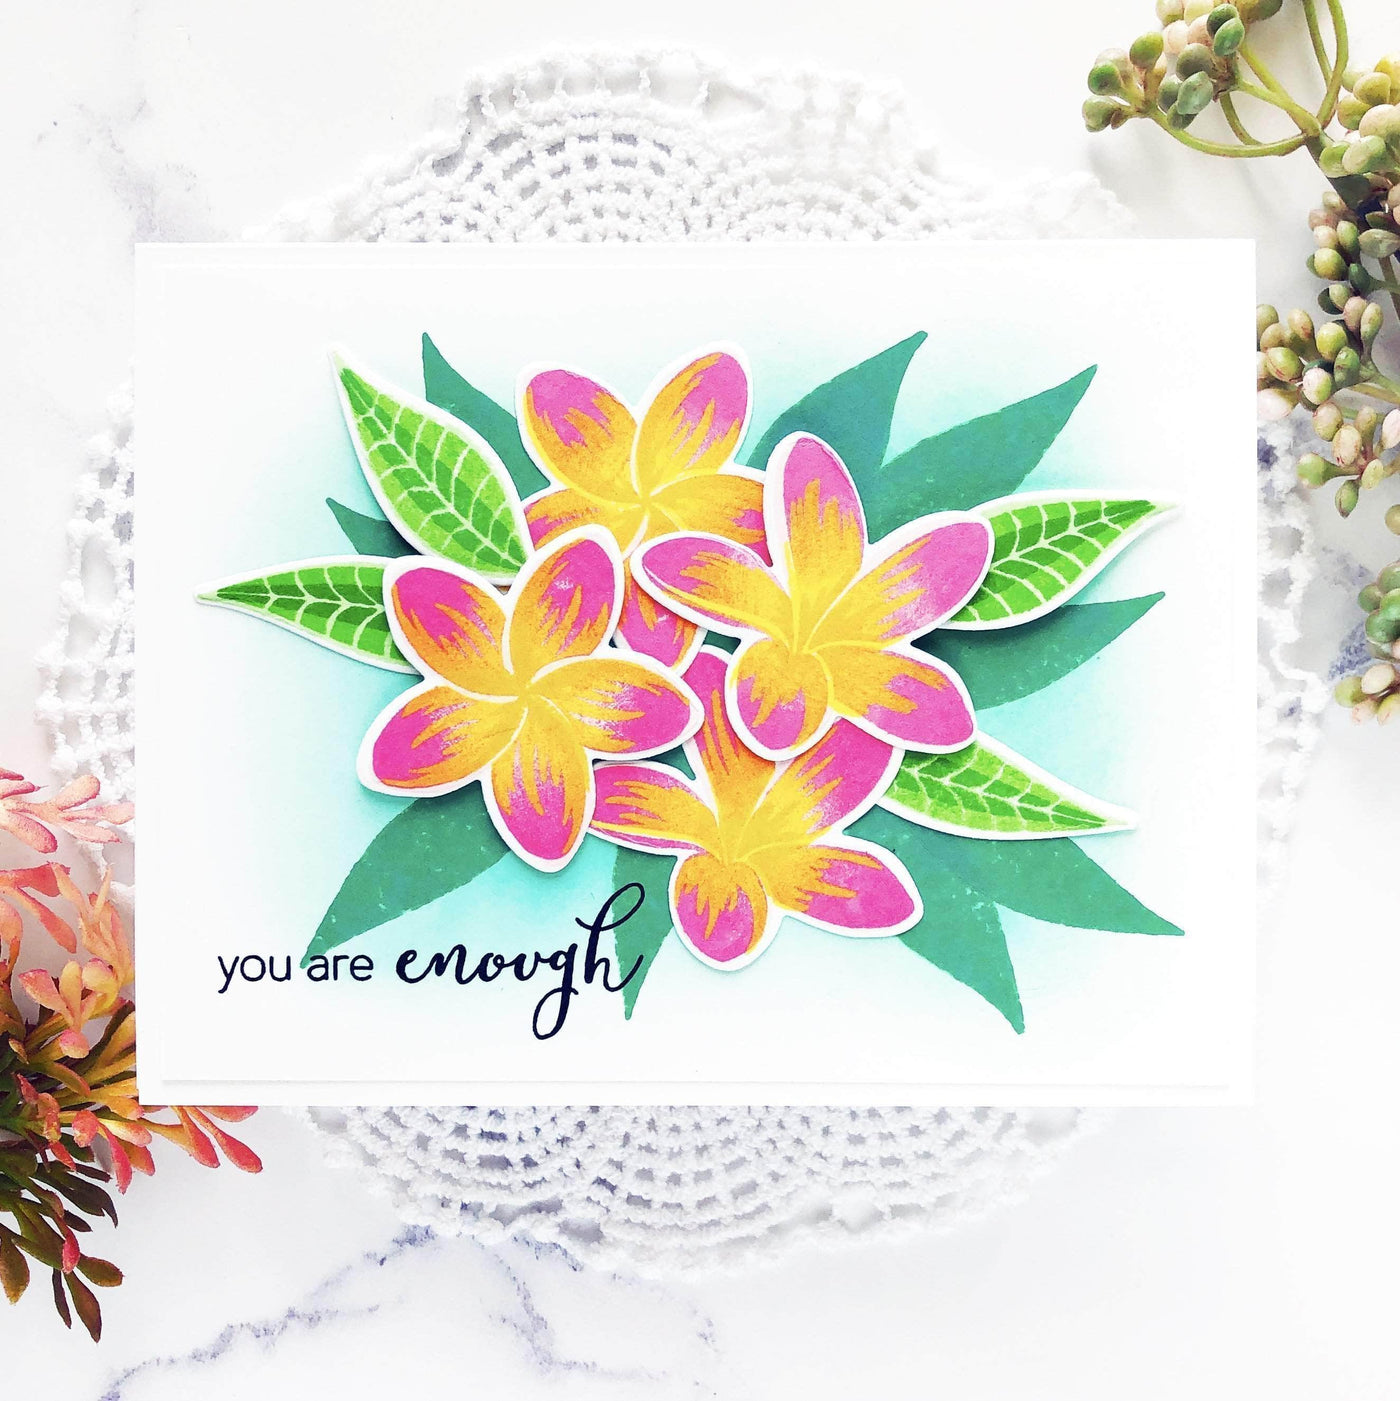 Clear Stamps Playful Plumeria Stamp Set